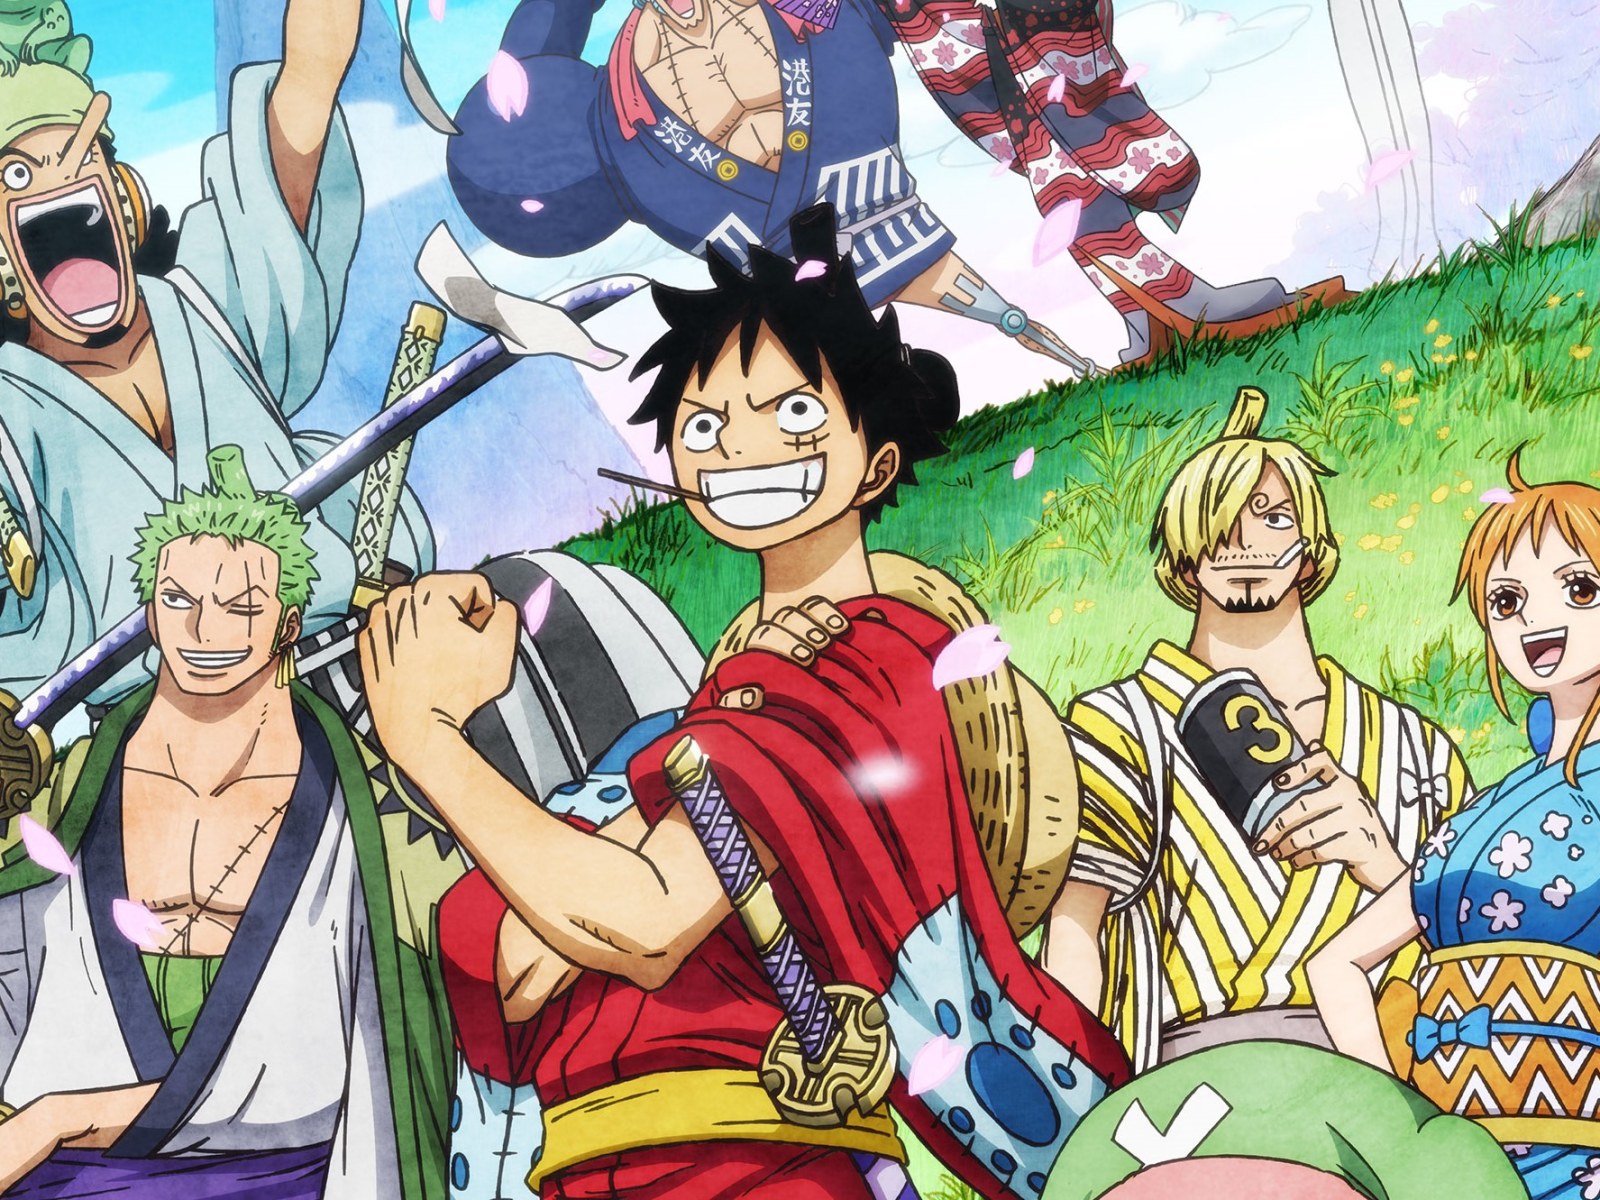 A whole generation of manga is ending yet one piece still running